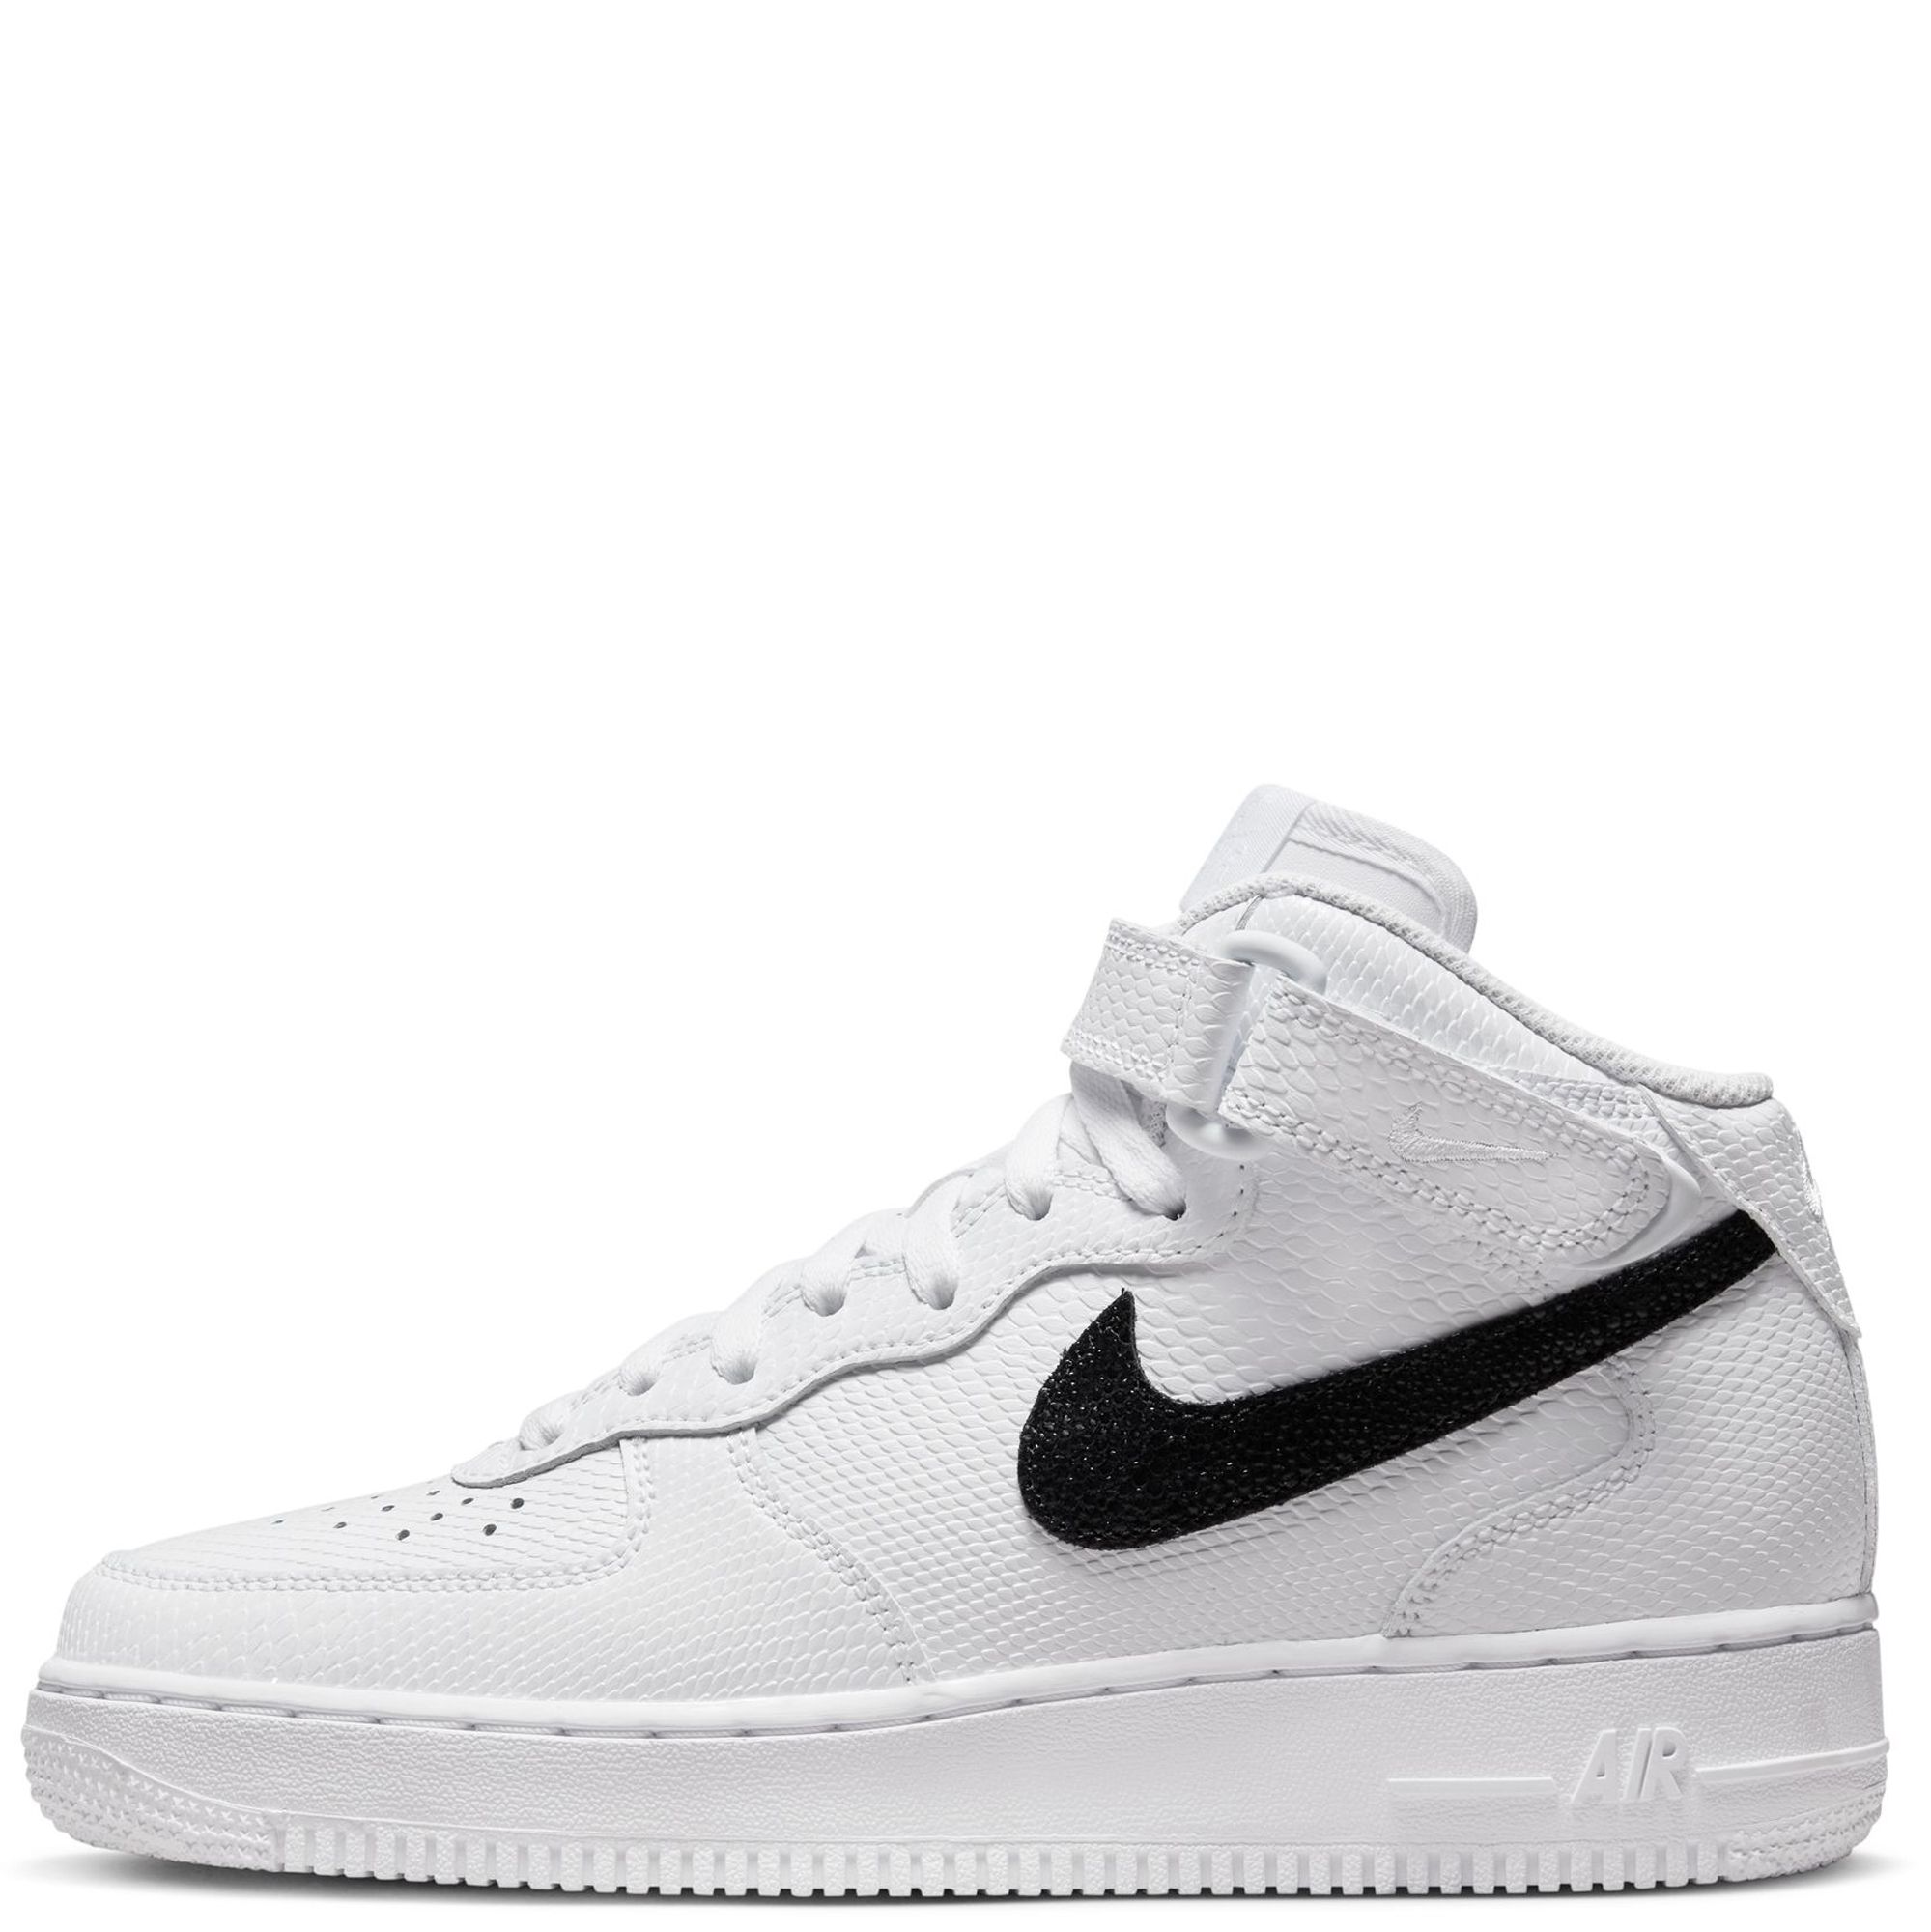 Nike Air Force 1 '07 Mid White/Black Women's Shoes, Size: 7